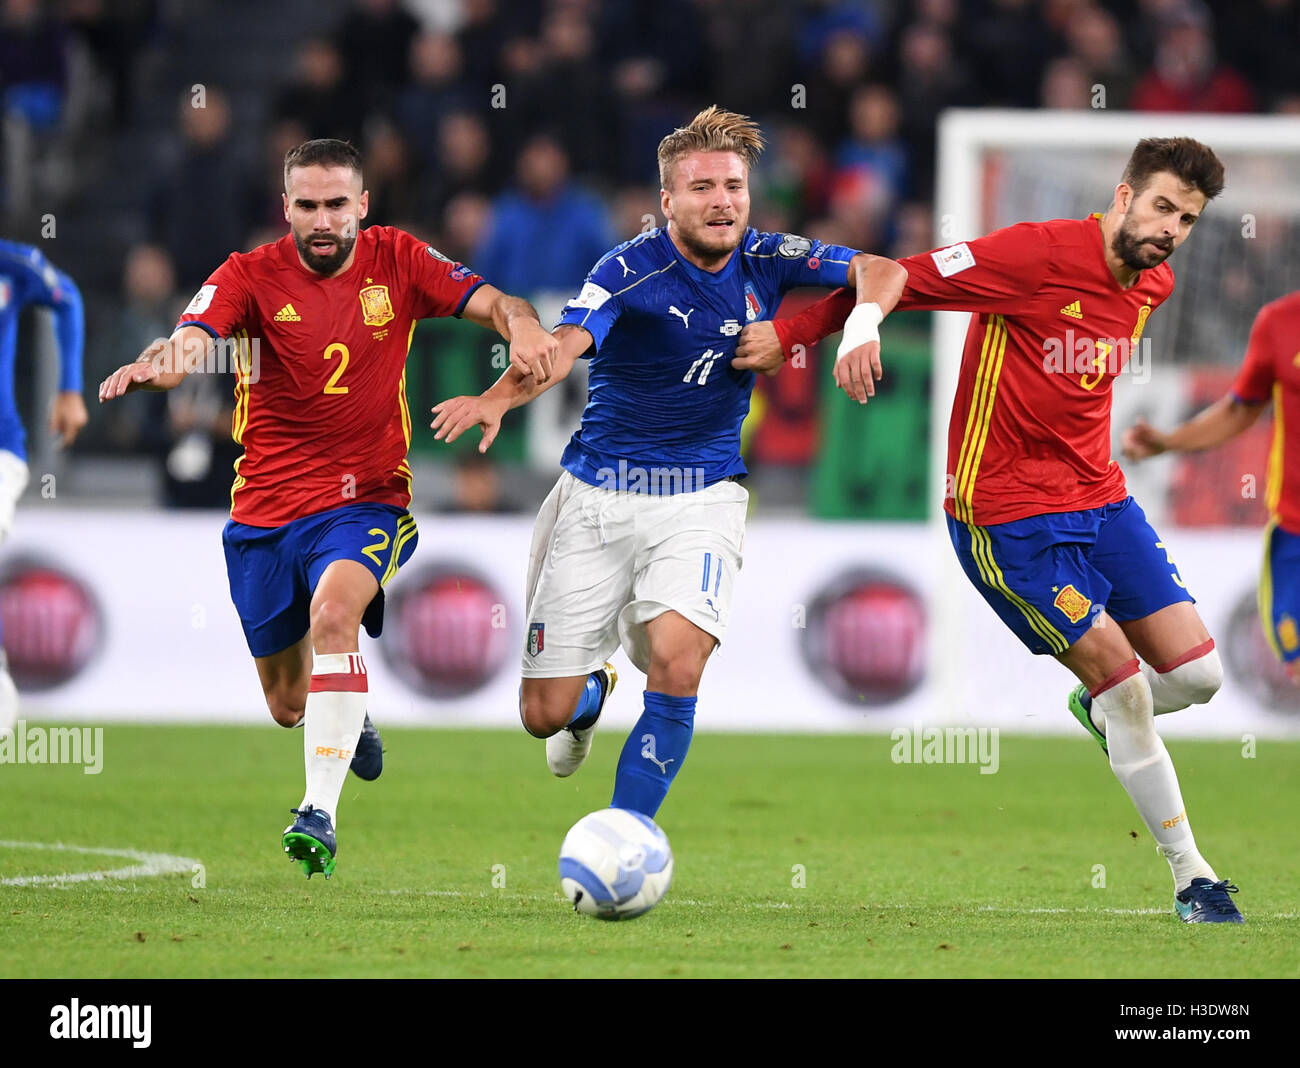 Turin, Italy. 6th Oct, 2016. Italy's Ciro Immobile vies with Spaine's Dani Carvajal(L) and Pique (R) during the World Cup 2018 football qualification match between Italy and Spain at the Juventus stadium in Turin, Italy, on Oct. 6, 2016. © Alberto Lingria/Xinhua/Alamy Live News Stock Photo